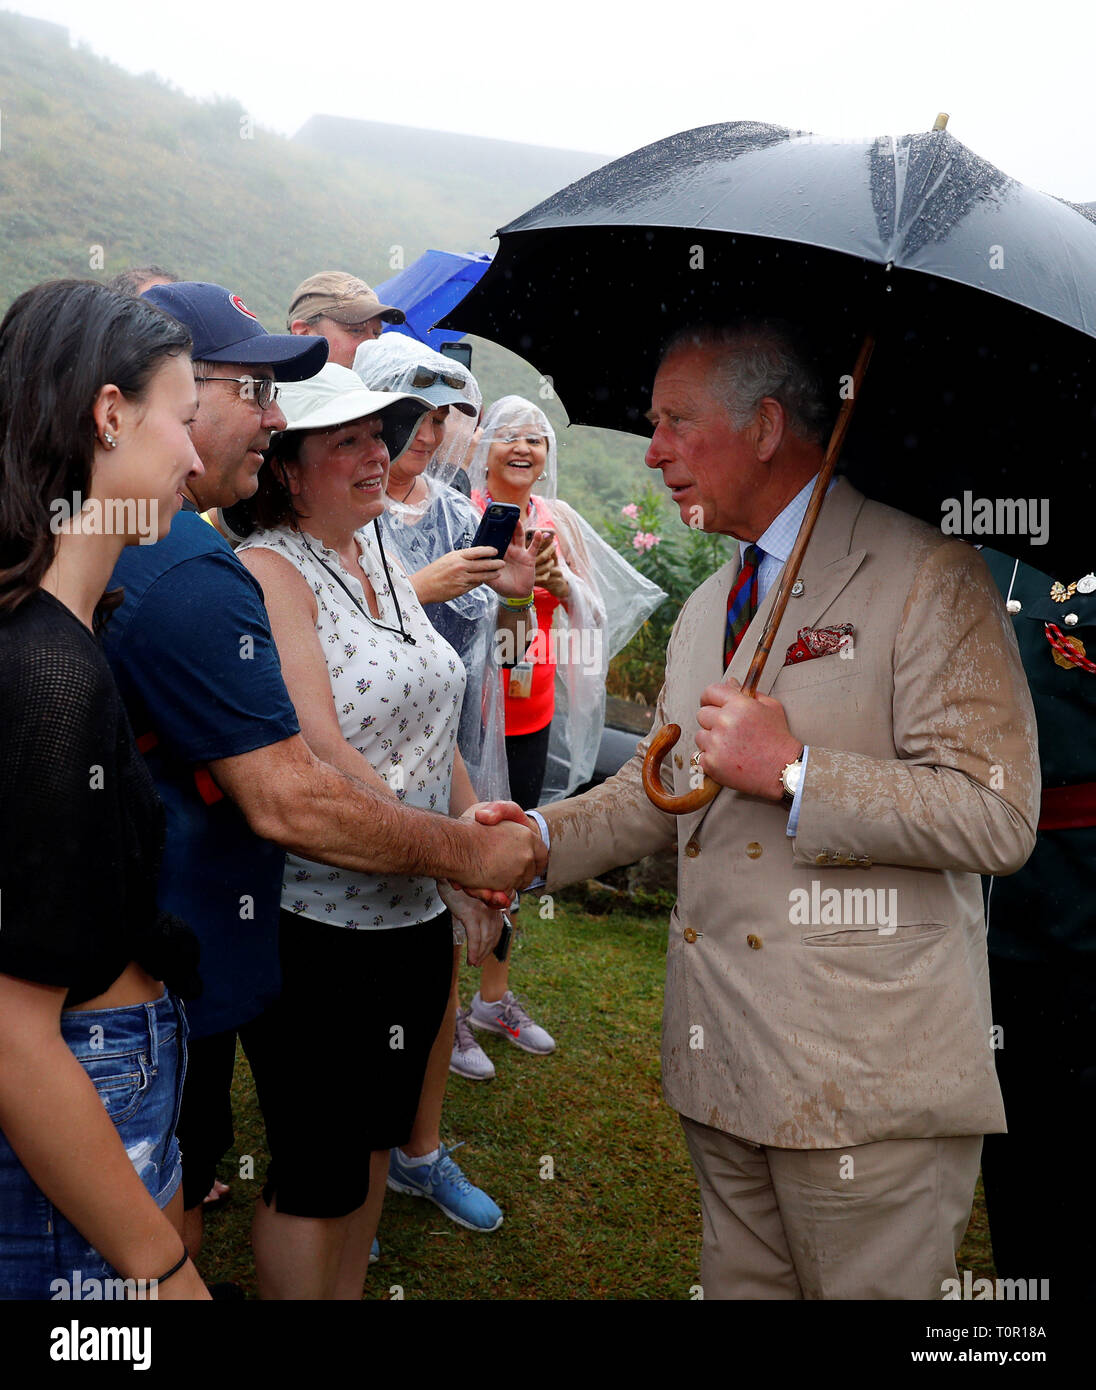 The Prince of Wales during a visit to Brimstone Hill Fortress National Park in St. Kitts and Nevis, a UNESCO World Heritage Site, during a one day visit to the Caribbean island. Stock Photo